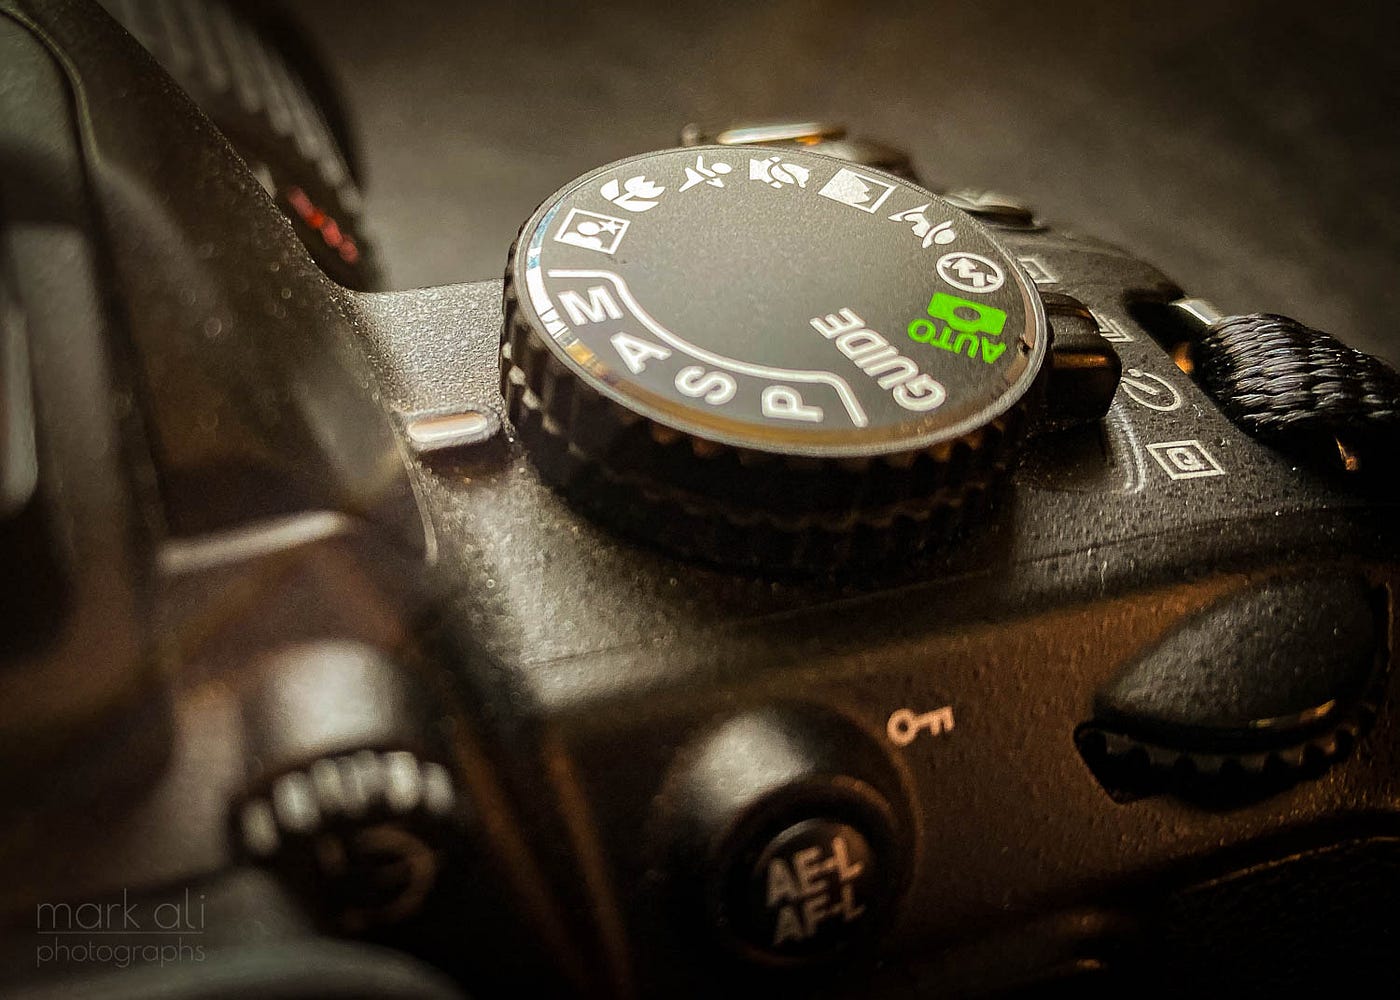 A close-up of the mode dial on a camera.